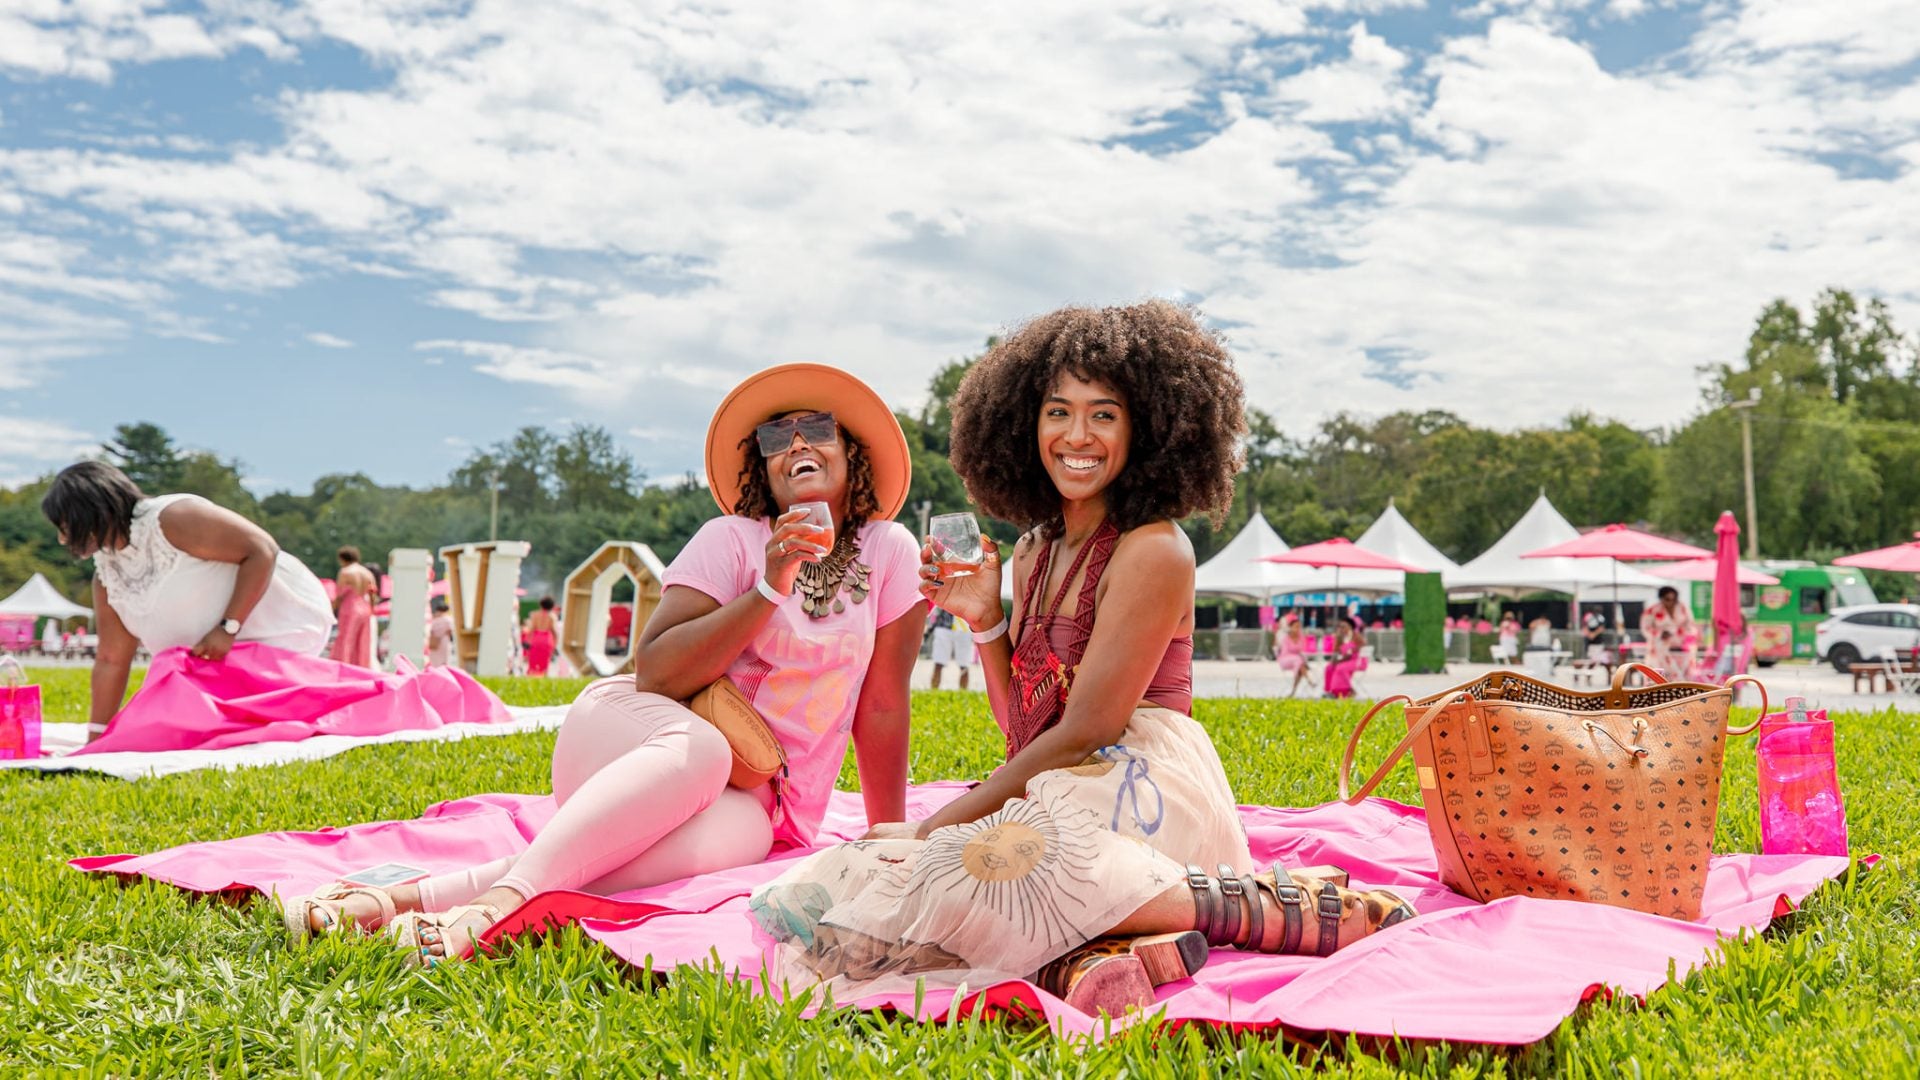 Black-Owned Célébrez en Rosé Wine and Music Festival Returns This Year To 4 Cities With “Improved Experience”